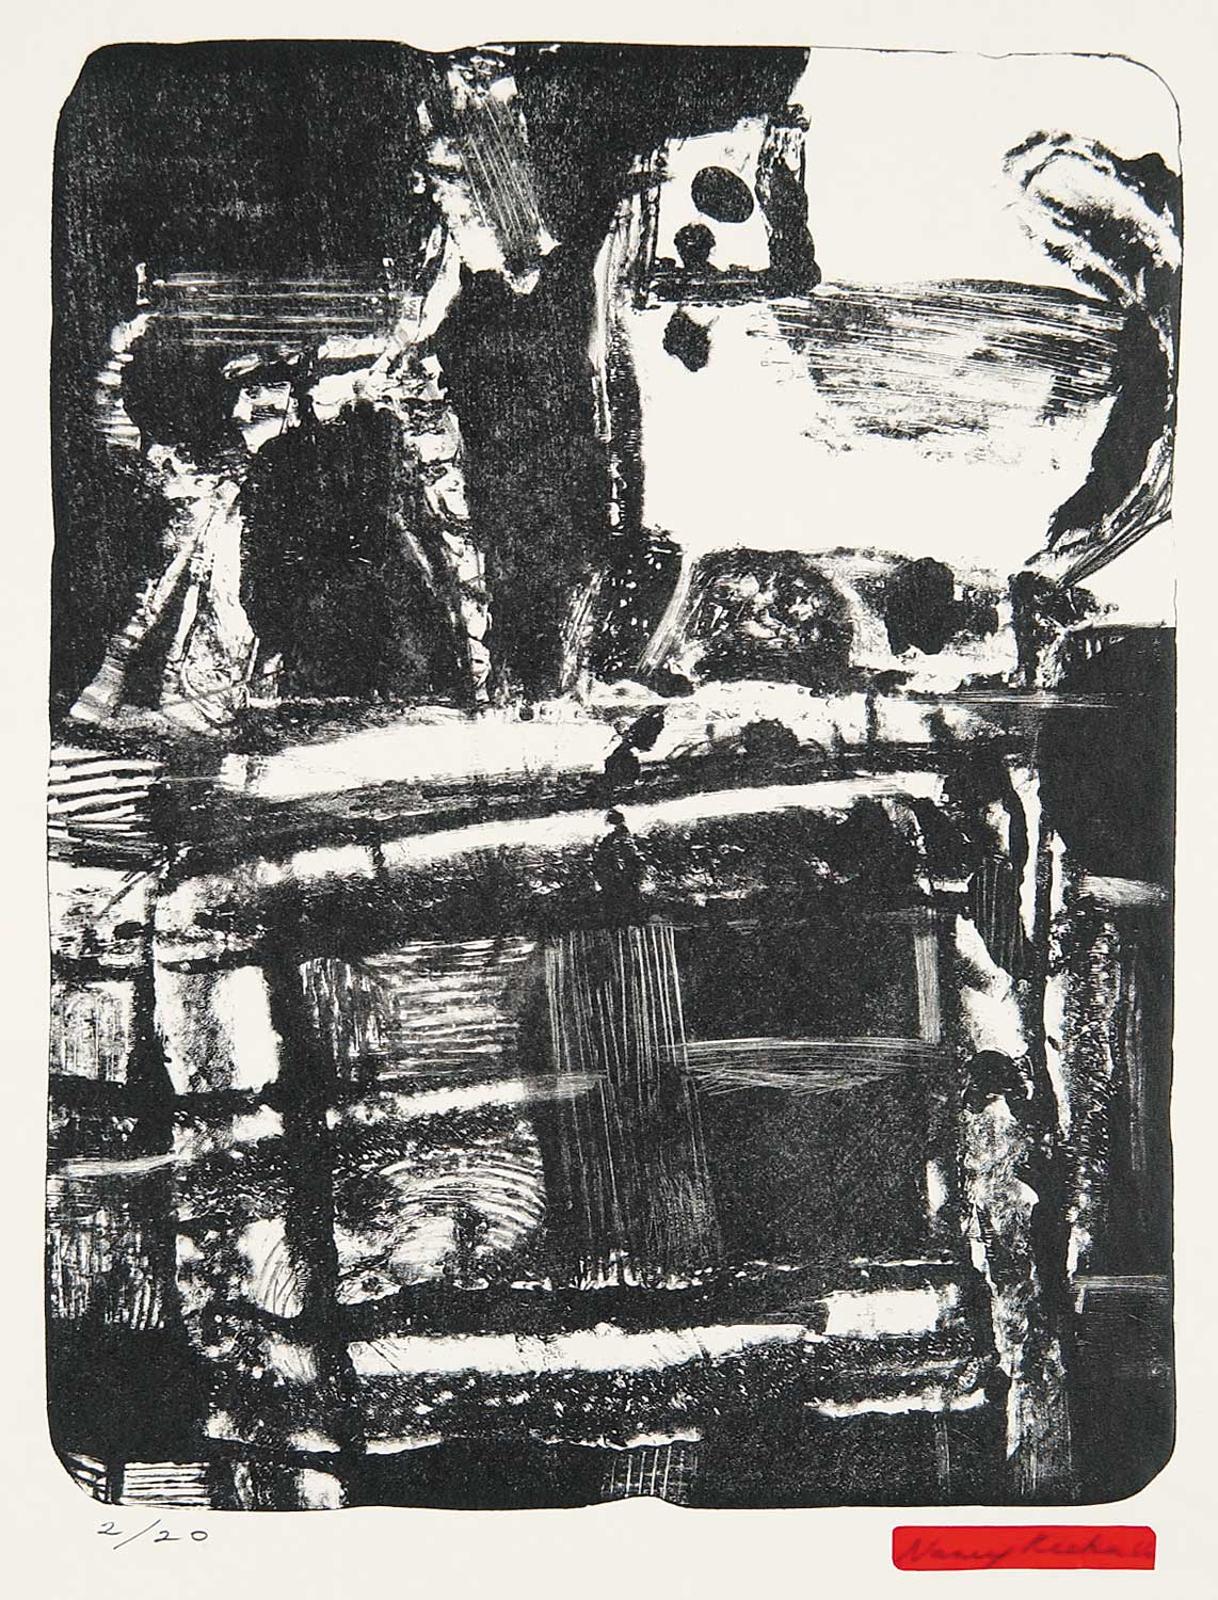 Nancy Luxmore Keehn (1926-2015) - Untitled - Black and White Abstract  #2/20